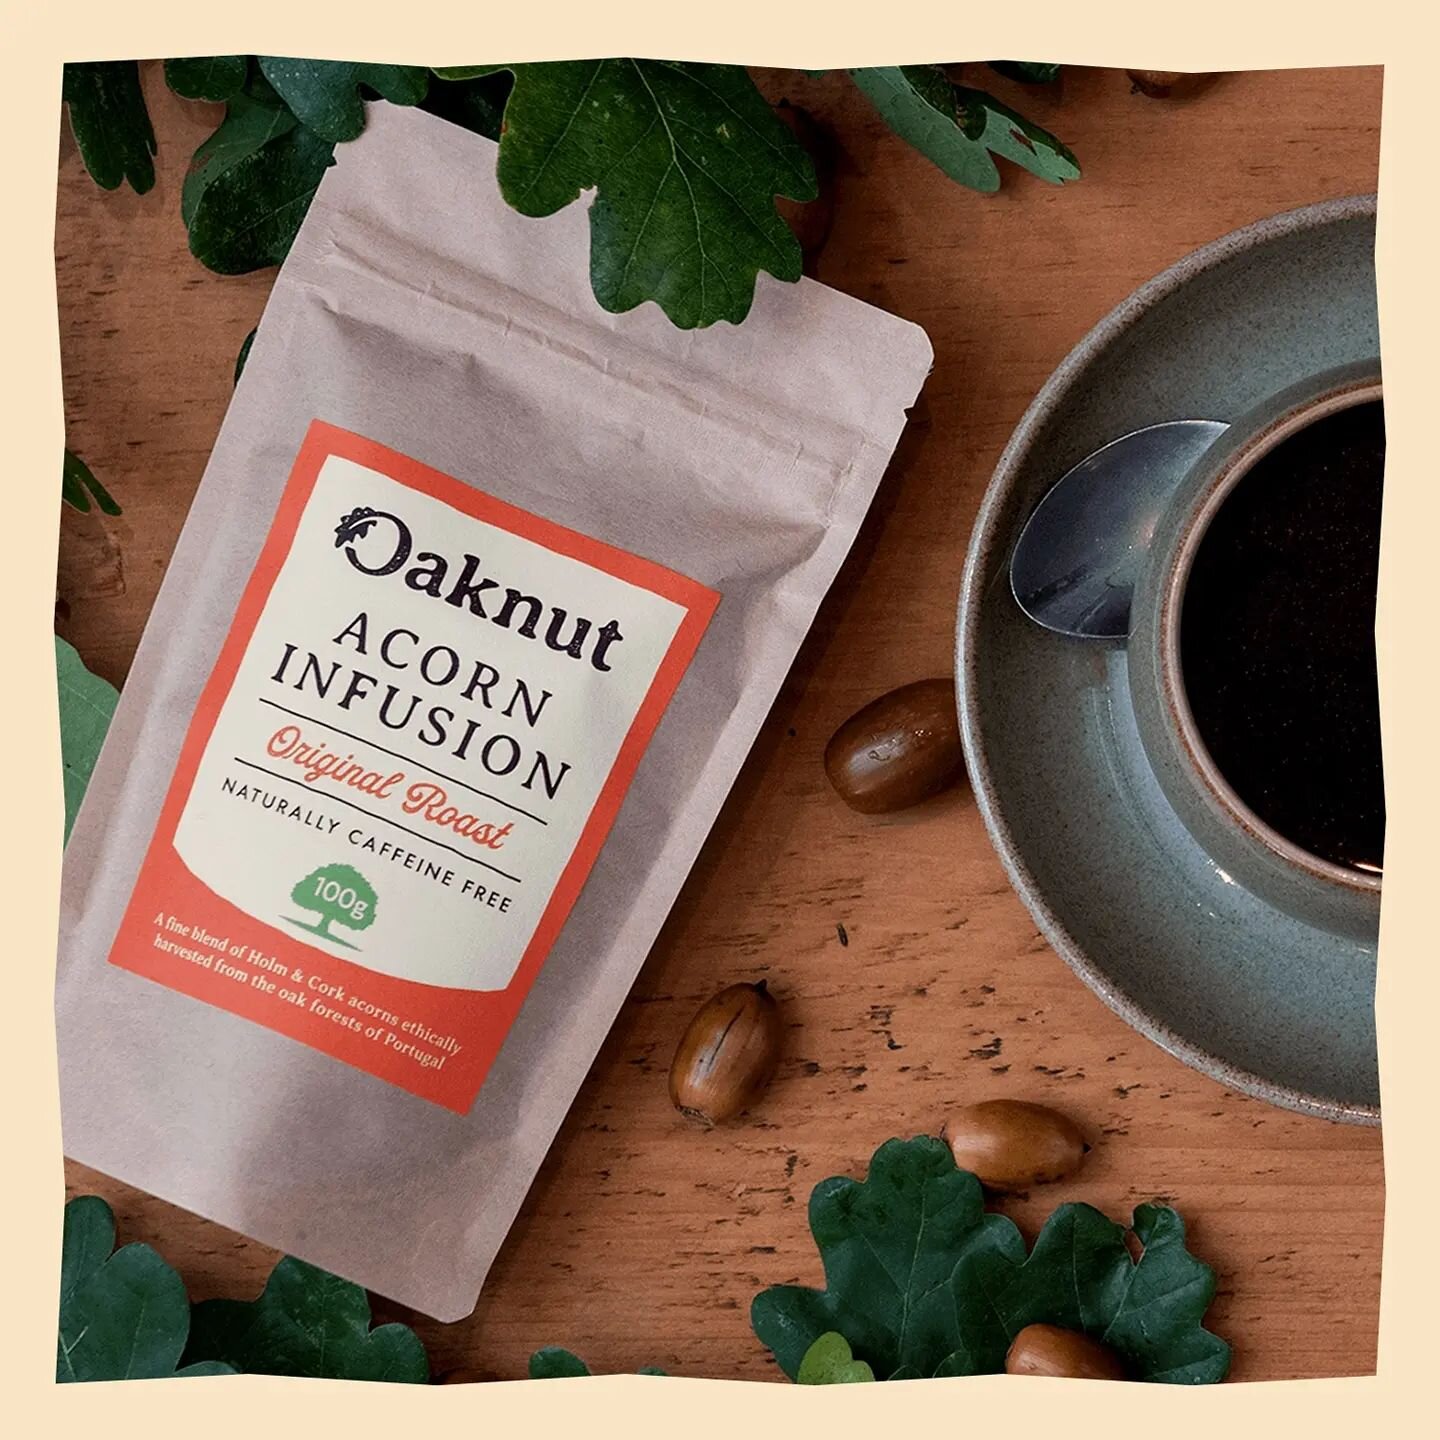 Oaknut - Brand Identity &amp; Packaging Design. 

A hand-roasted caffeine-free hot drink made from 100% acorn; a natural &amp; sustainable alternative to tea and coffee. 2/3

Oaknut: @oaknut_living
Photography: @tristanphotography.co.uk
Labels: @the_